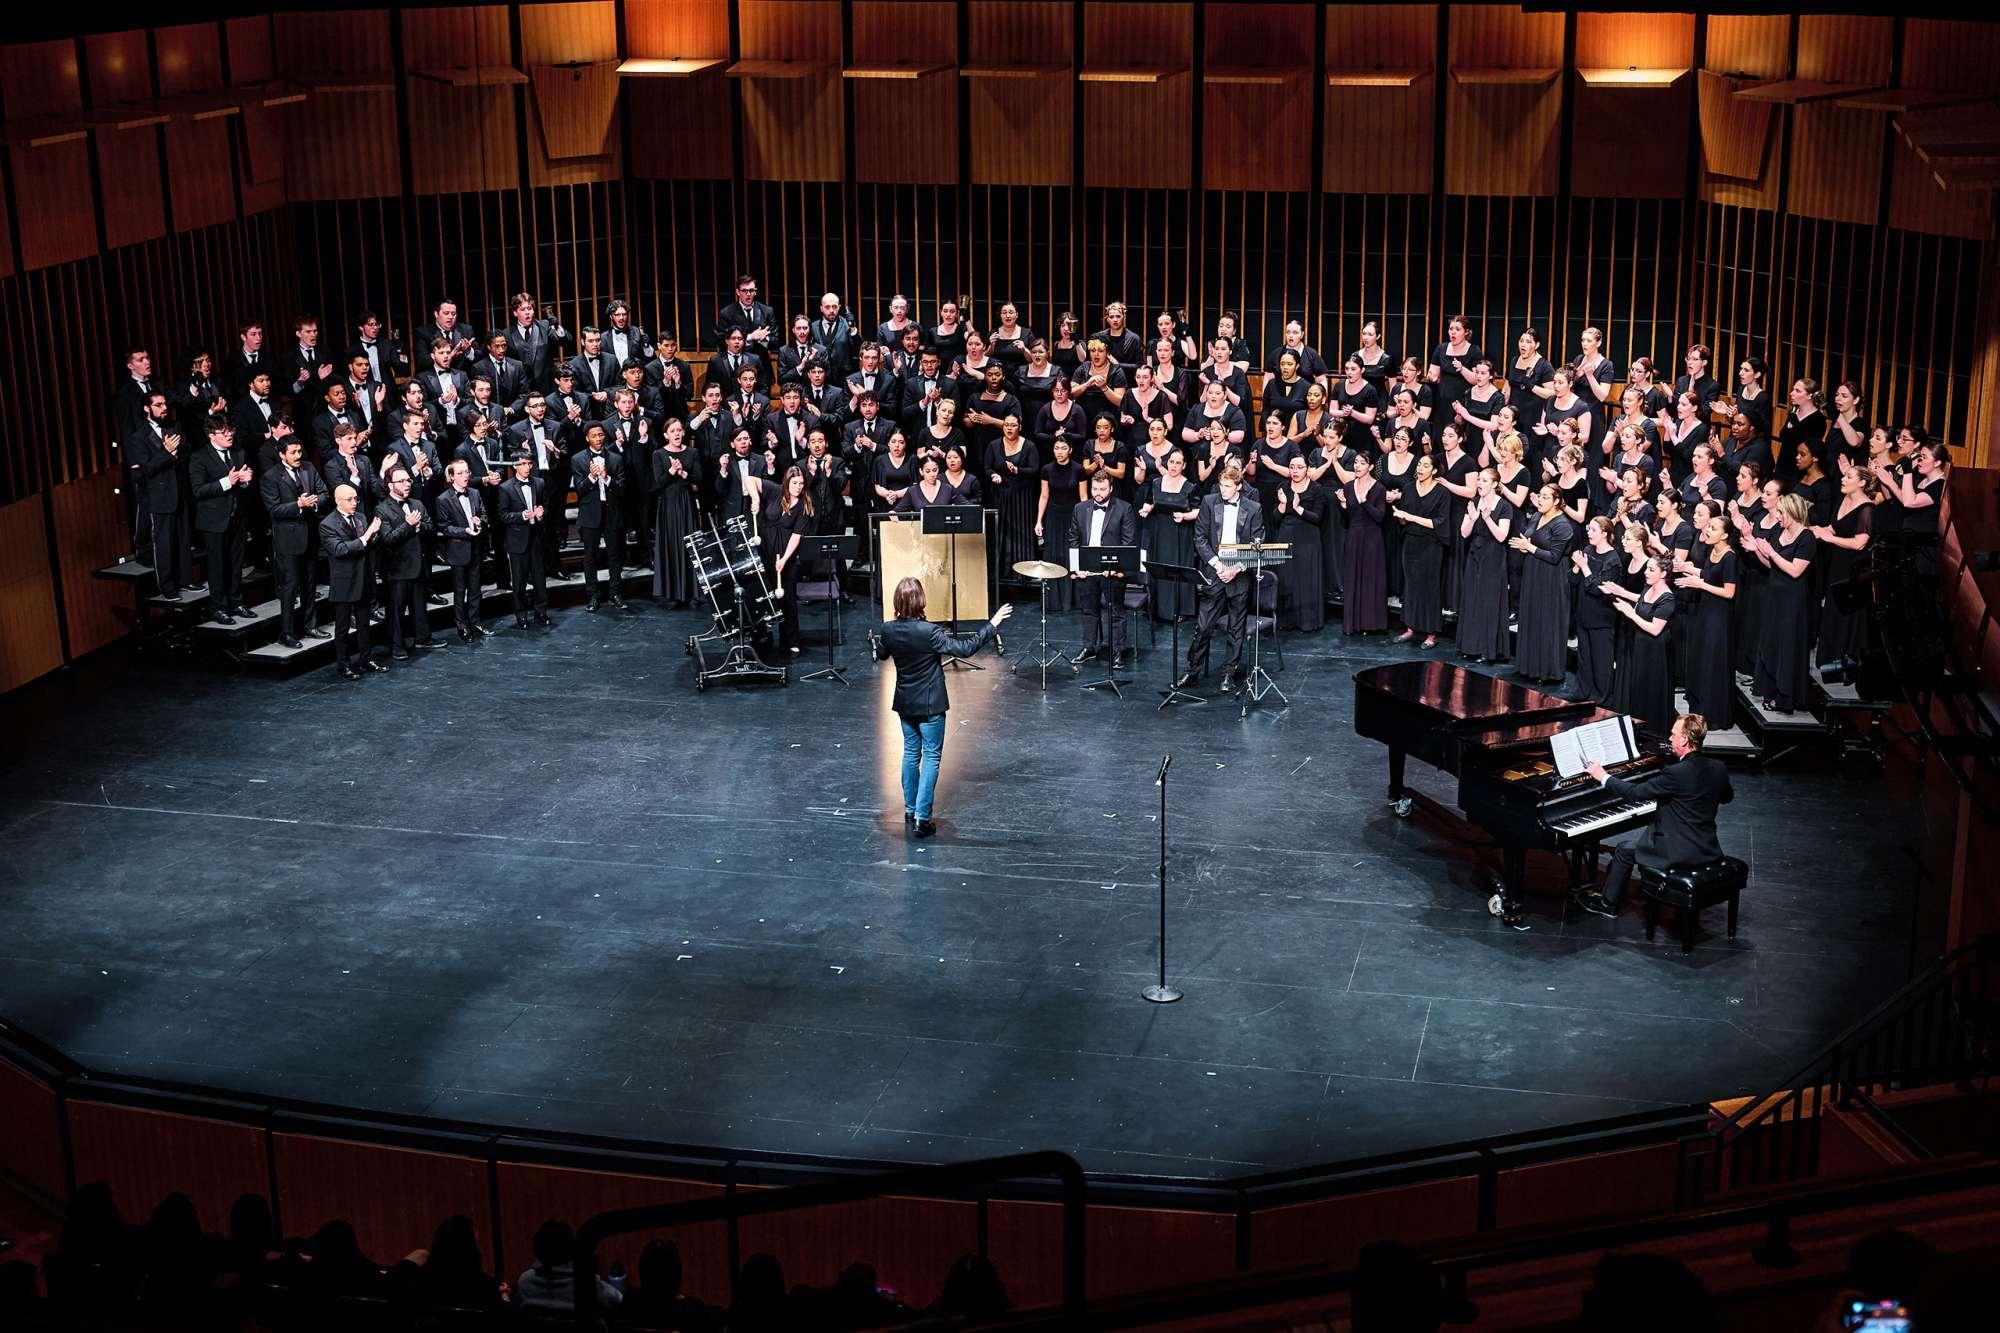 A chorus on stage with a man conducting.